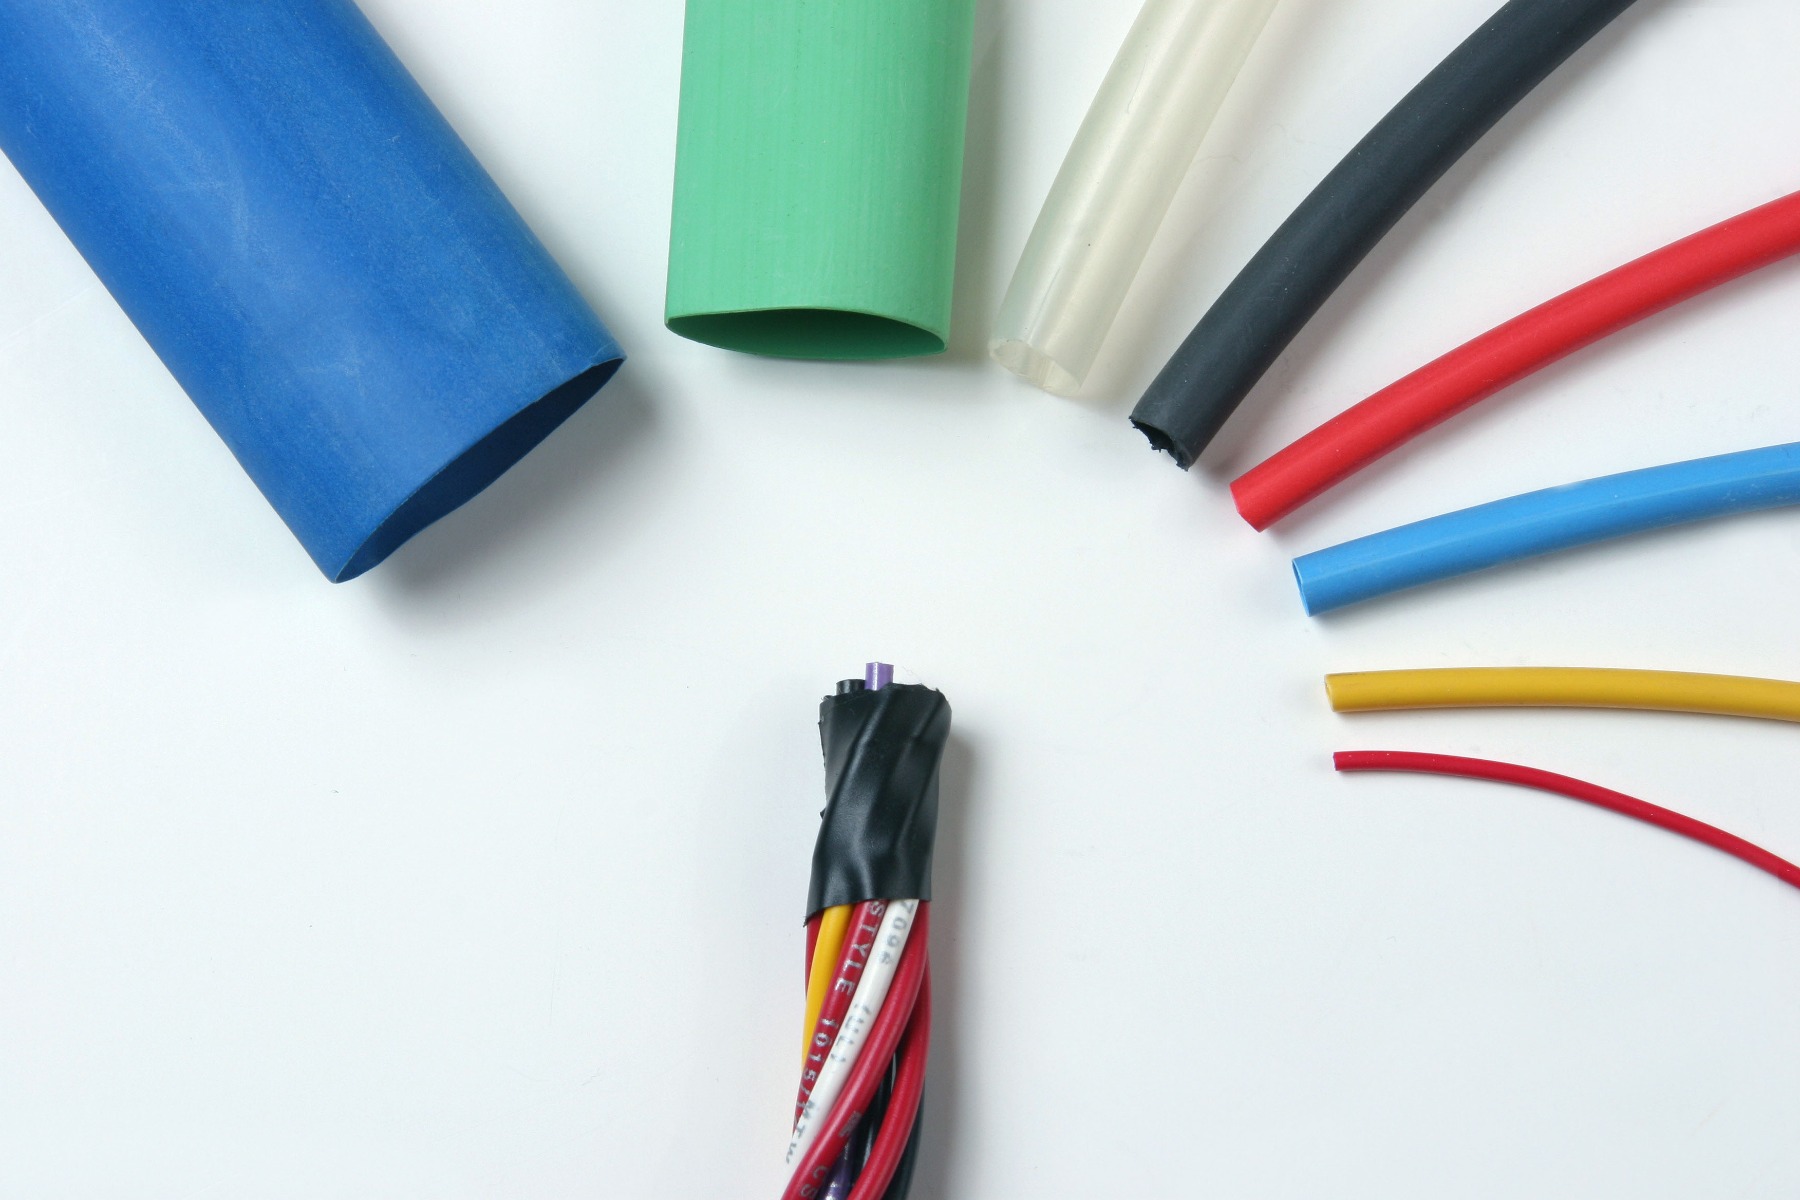 Durable Heat Shrink Sleeving Heat Shrink Sleeve for Solder Joints Wire Core 